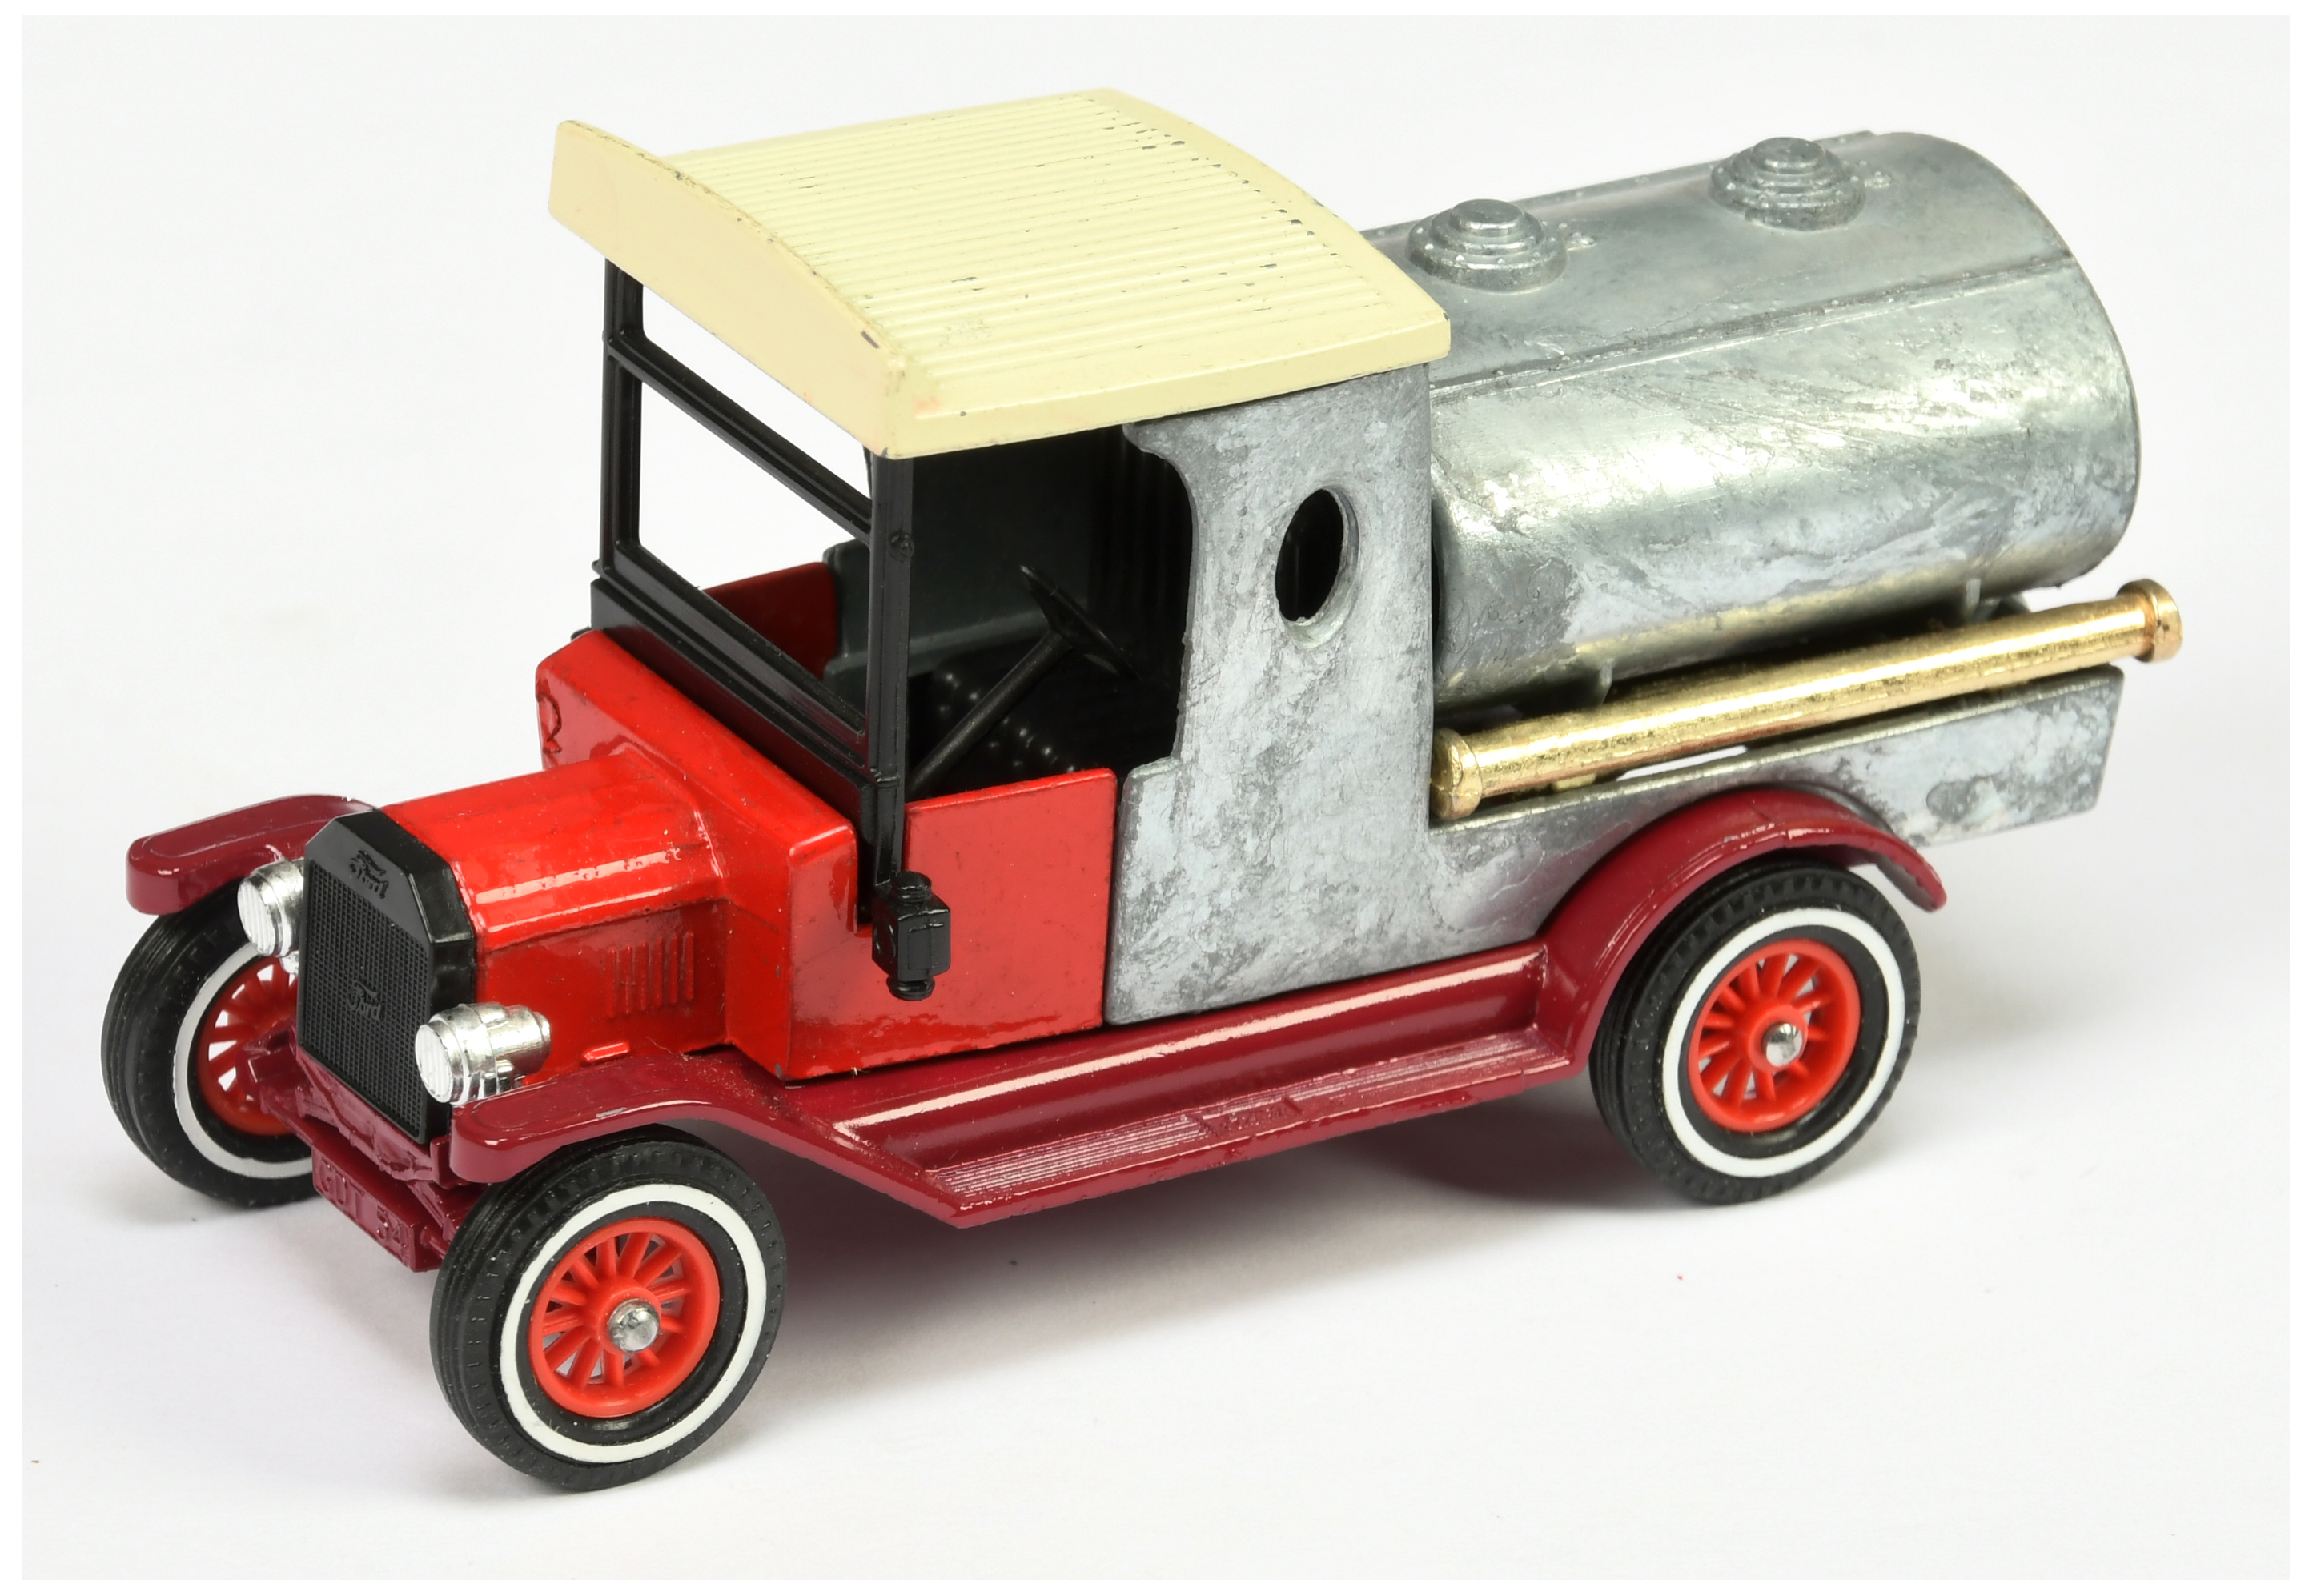 Matchbox Models of Yesteryear Y3 1912 Ford Model T Tanker - trial model without logos - bare meta...